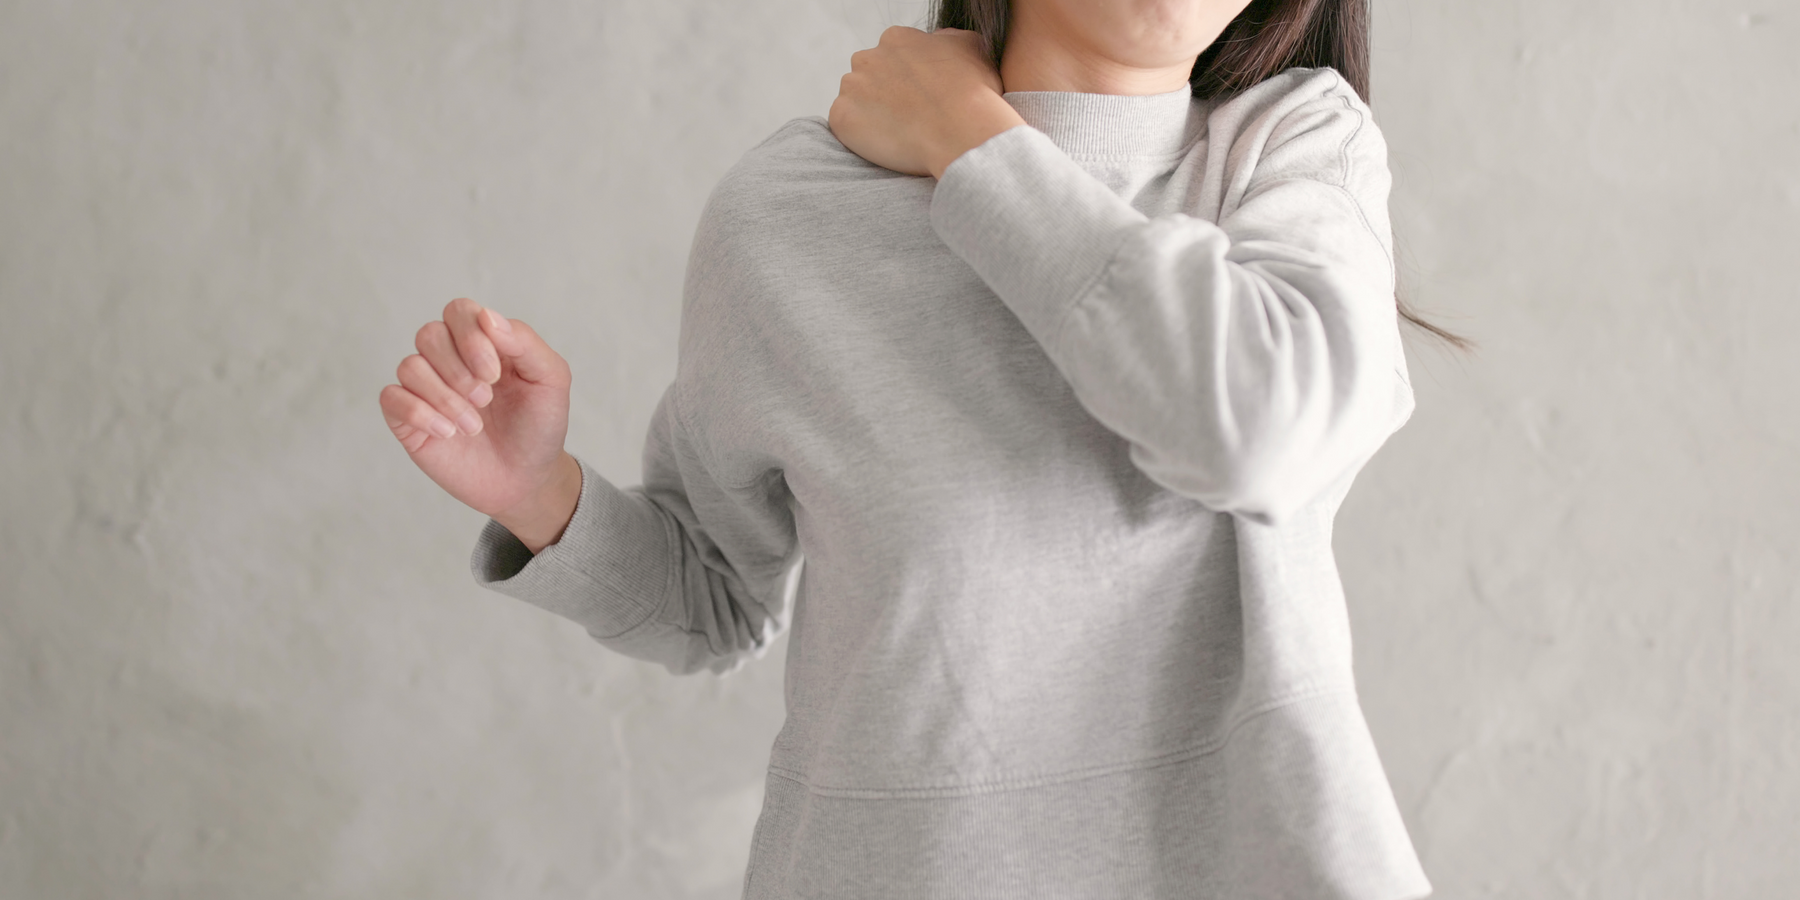 Woman massaging her right shoulder with her left hand